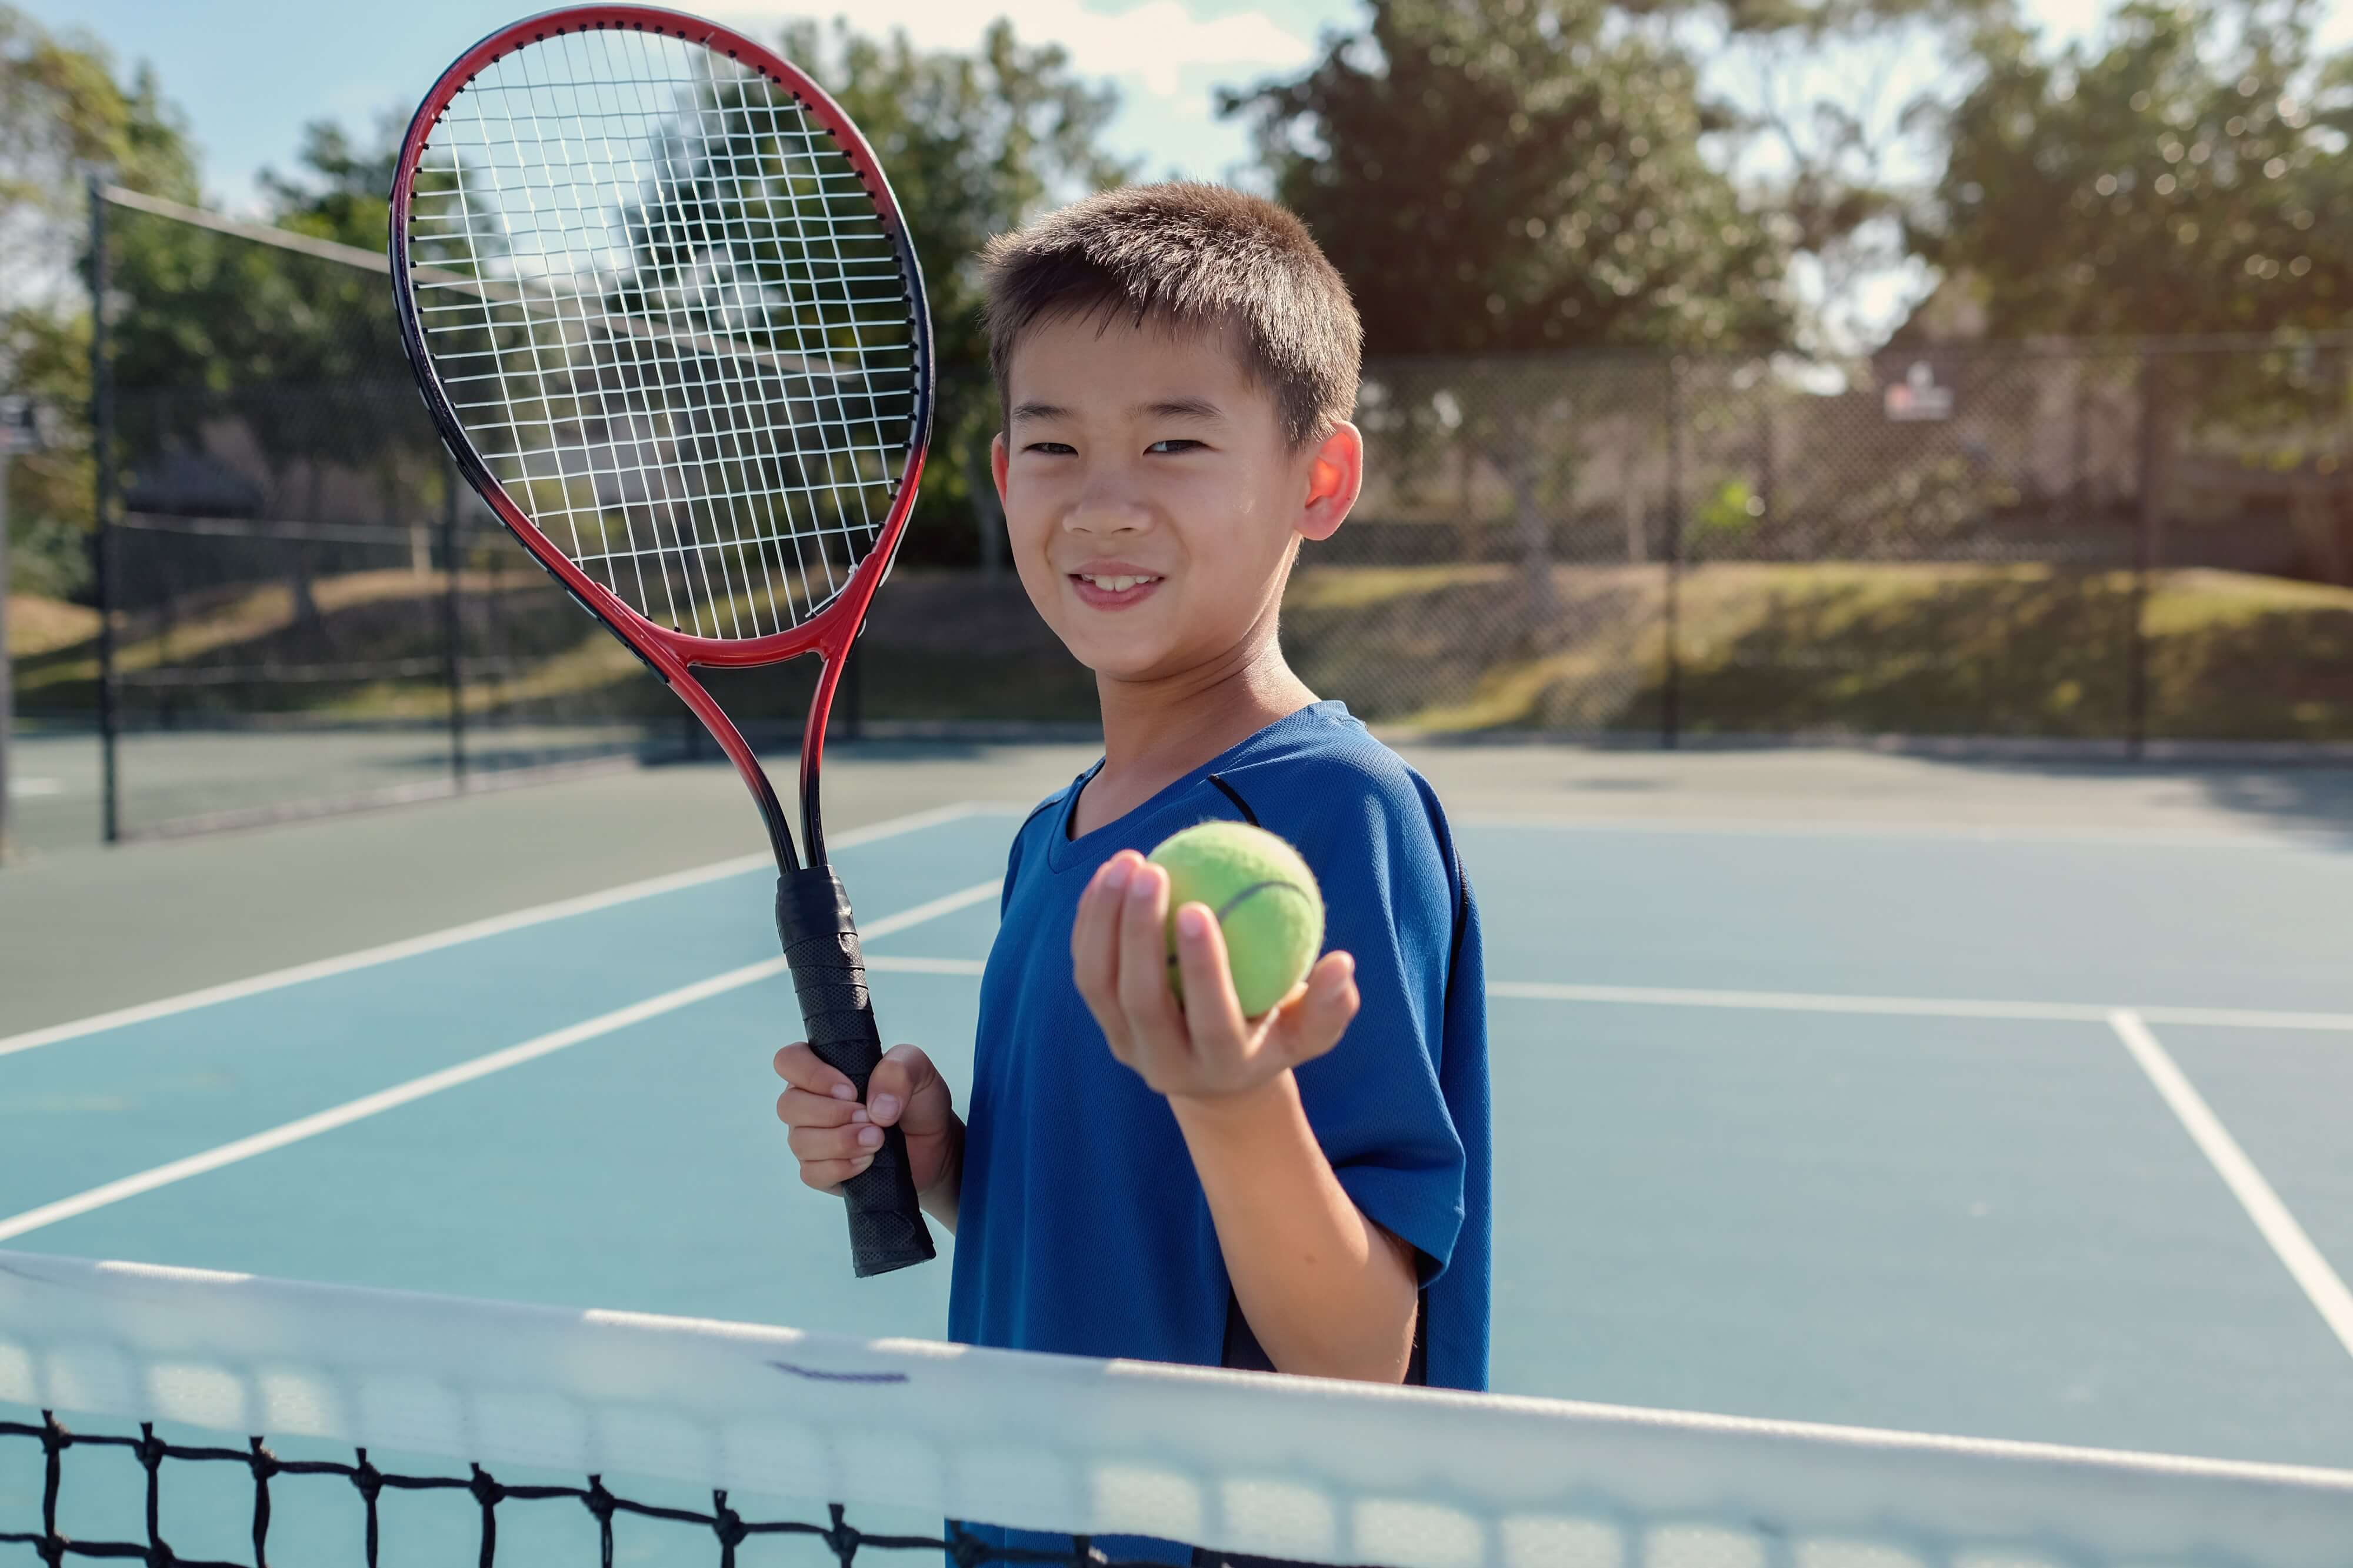 Boy on blue outdoor tennis court holding a tennis racket in his right hand and a tennis ball in his left hand